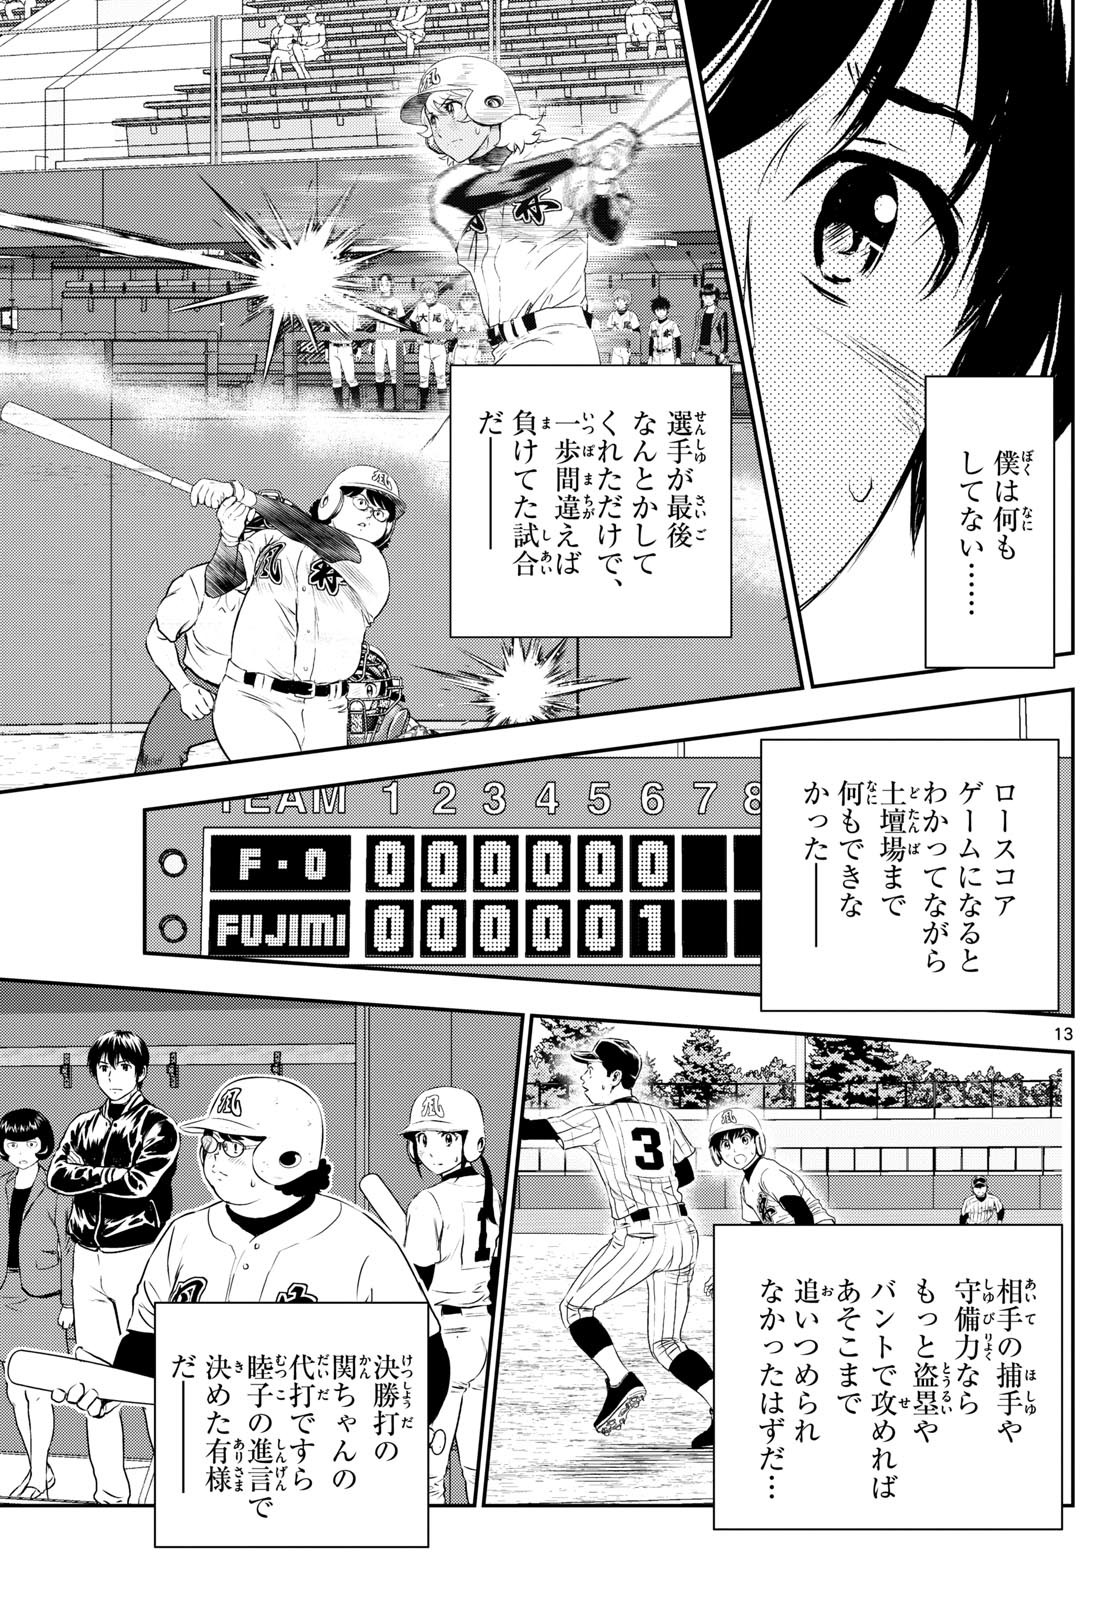 Major 2nd - メジャーセカンド - Chapter 278 - Page 13